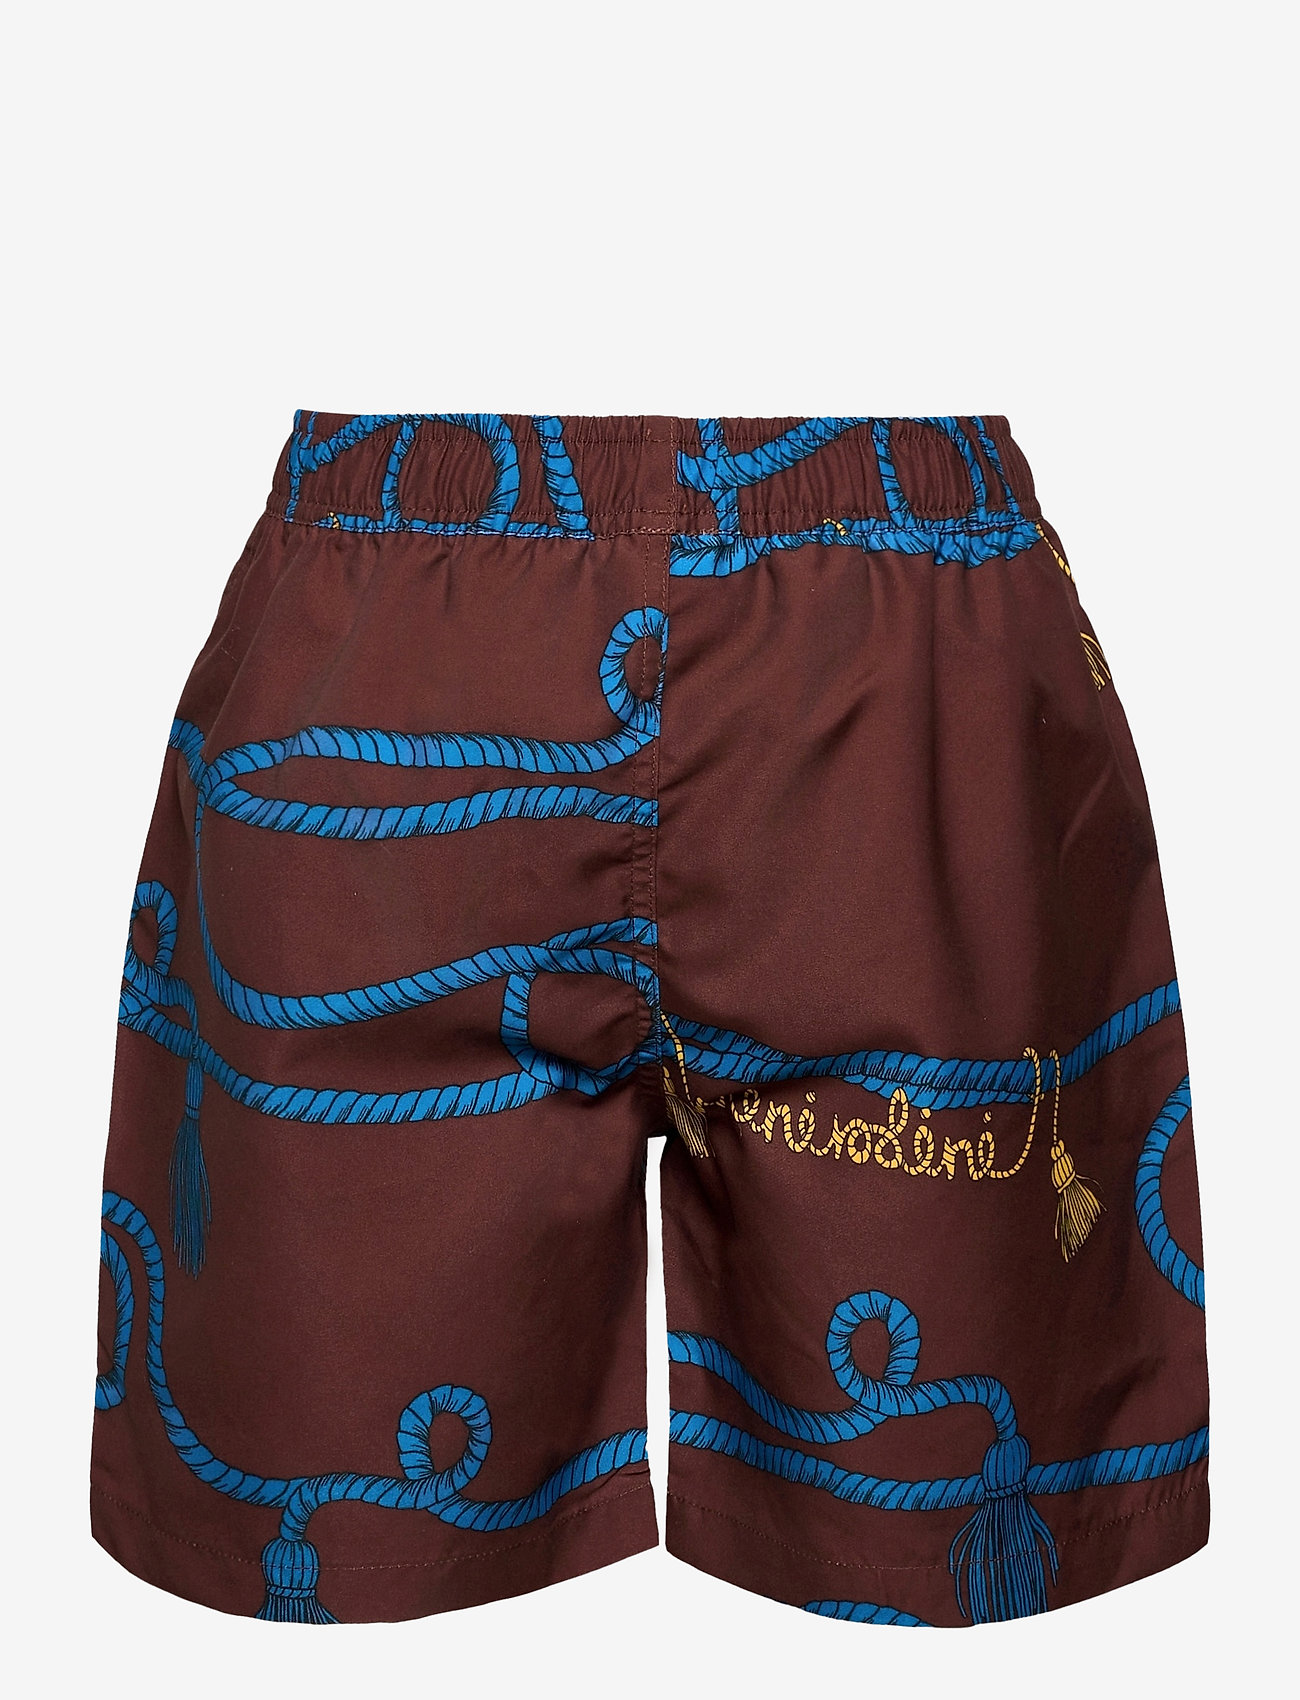 Mini Rodini - Rope swimshorts - sommerschnäppchen - brown - 1